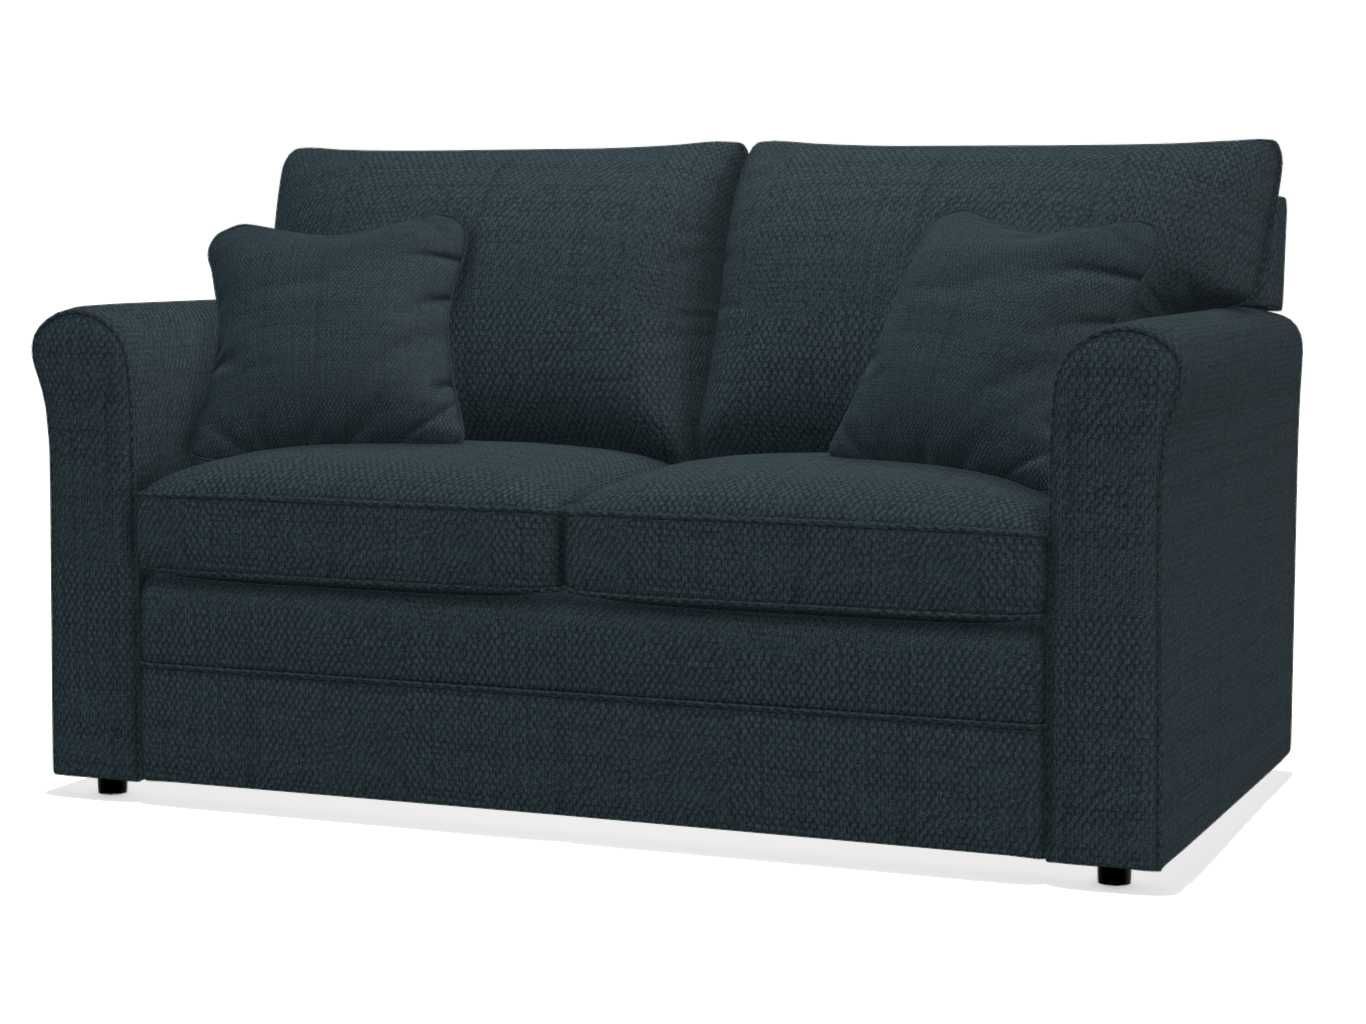 Affordable Sleeper Sofas For Overnight Guests